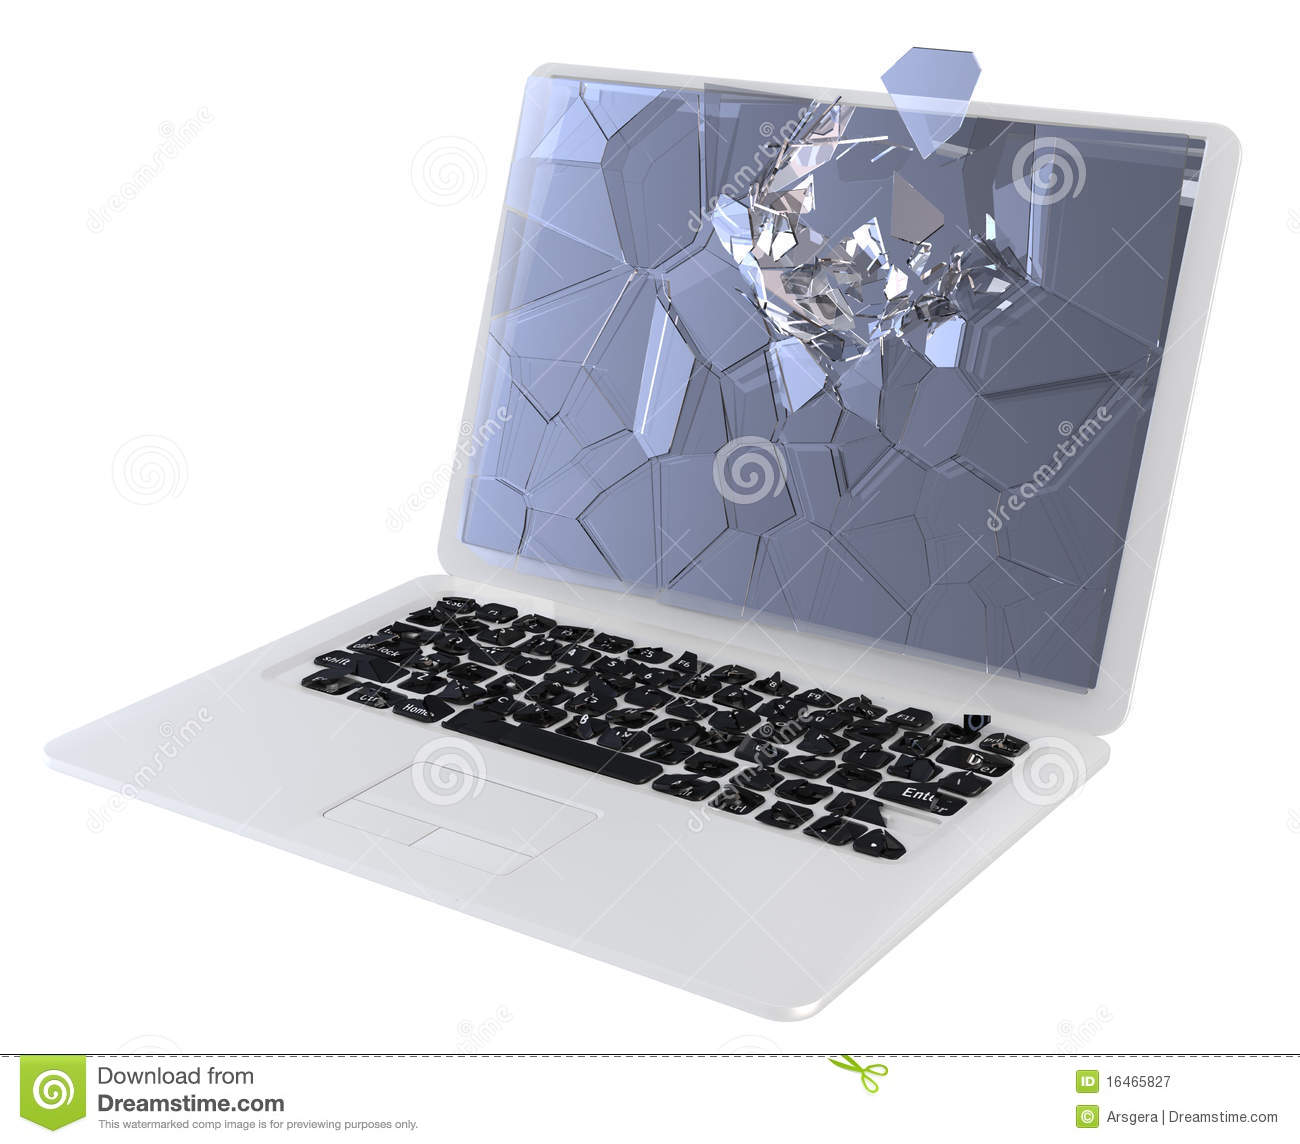 It Security Concept   Damaged Laptop Royalty Free Stock Photography    